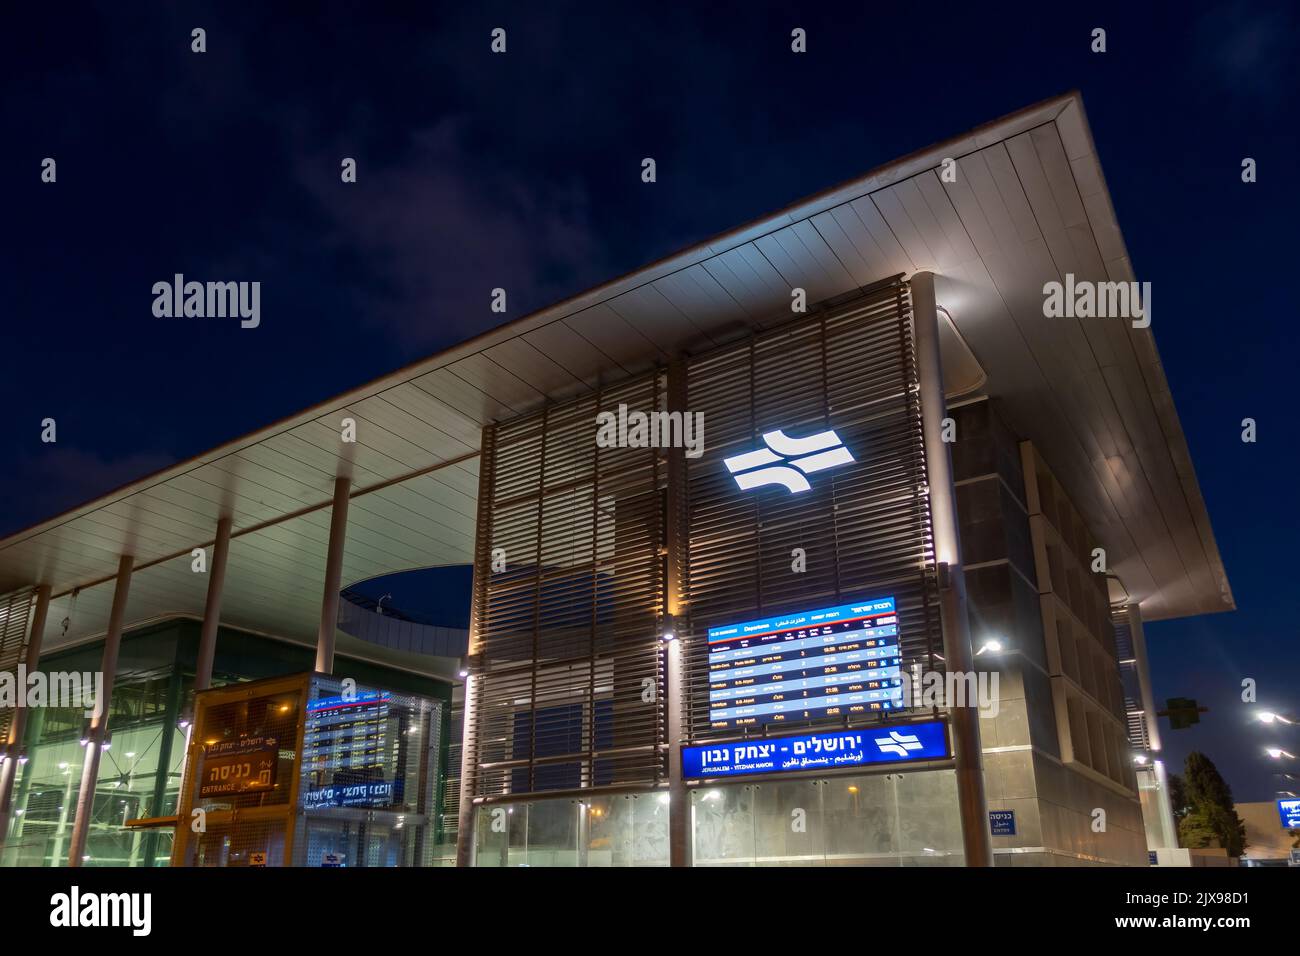 Exterior view of Yitzhak Navon train Station named after Jerusalem native Yitzhak Navon, the fifth President of Israel located in West Jerusalem Israel Stock Photo